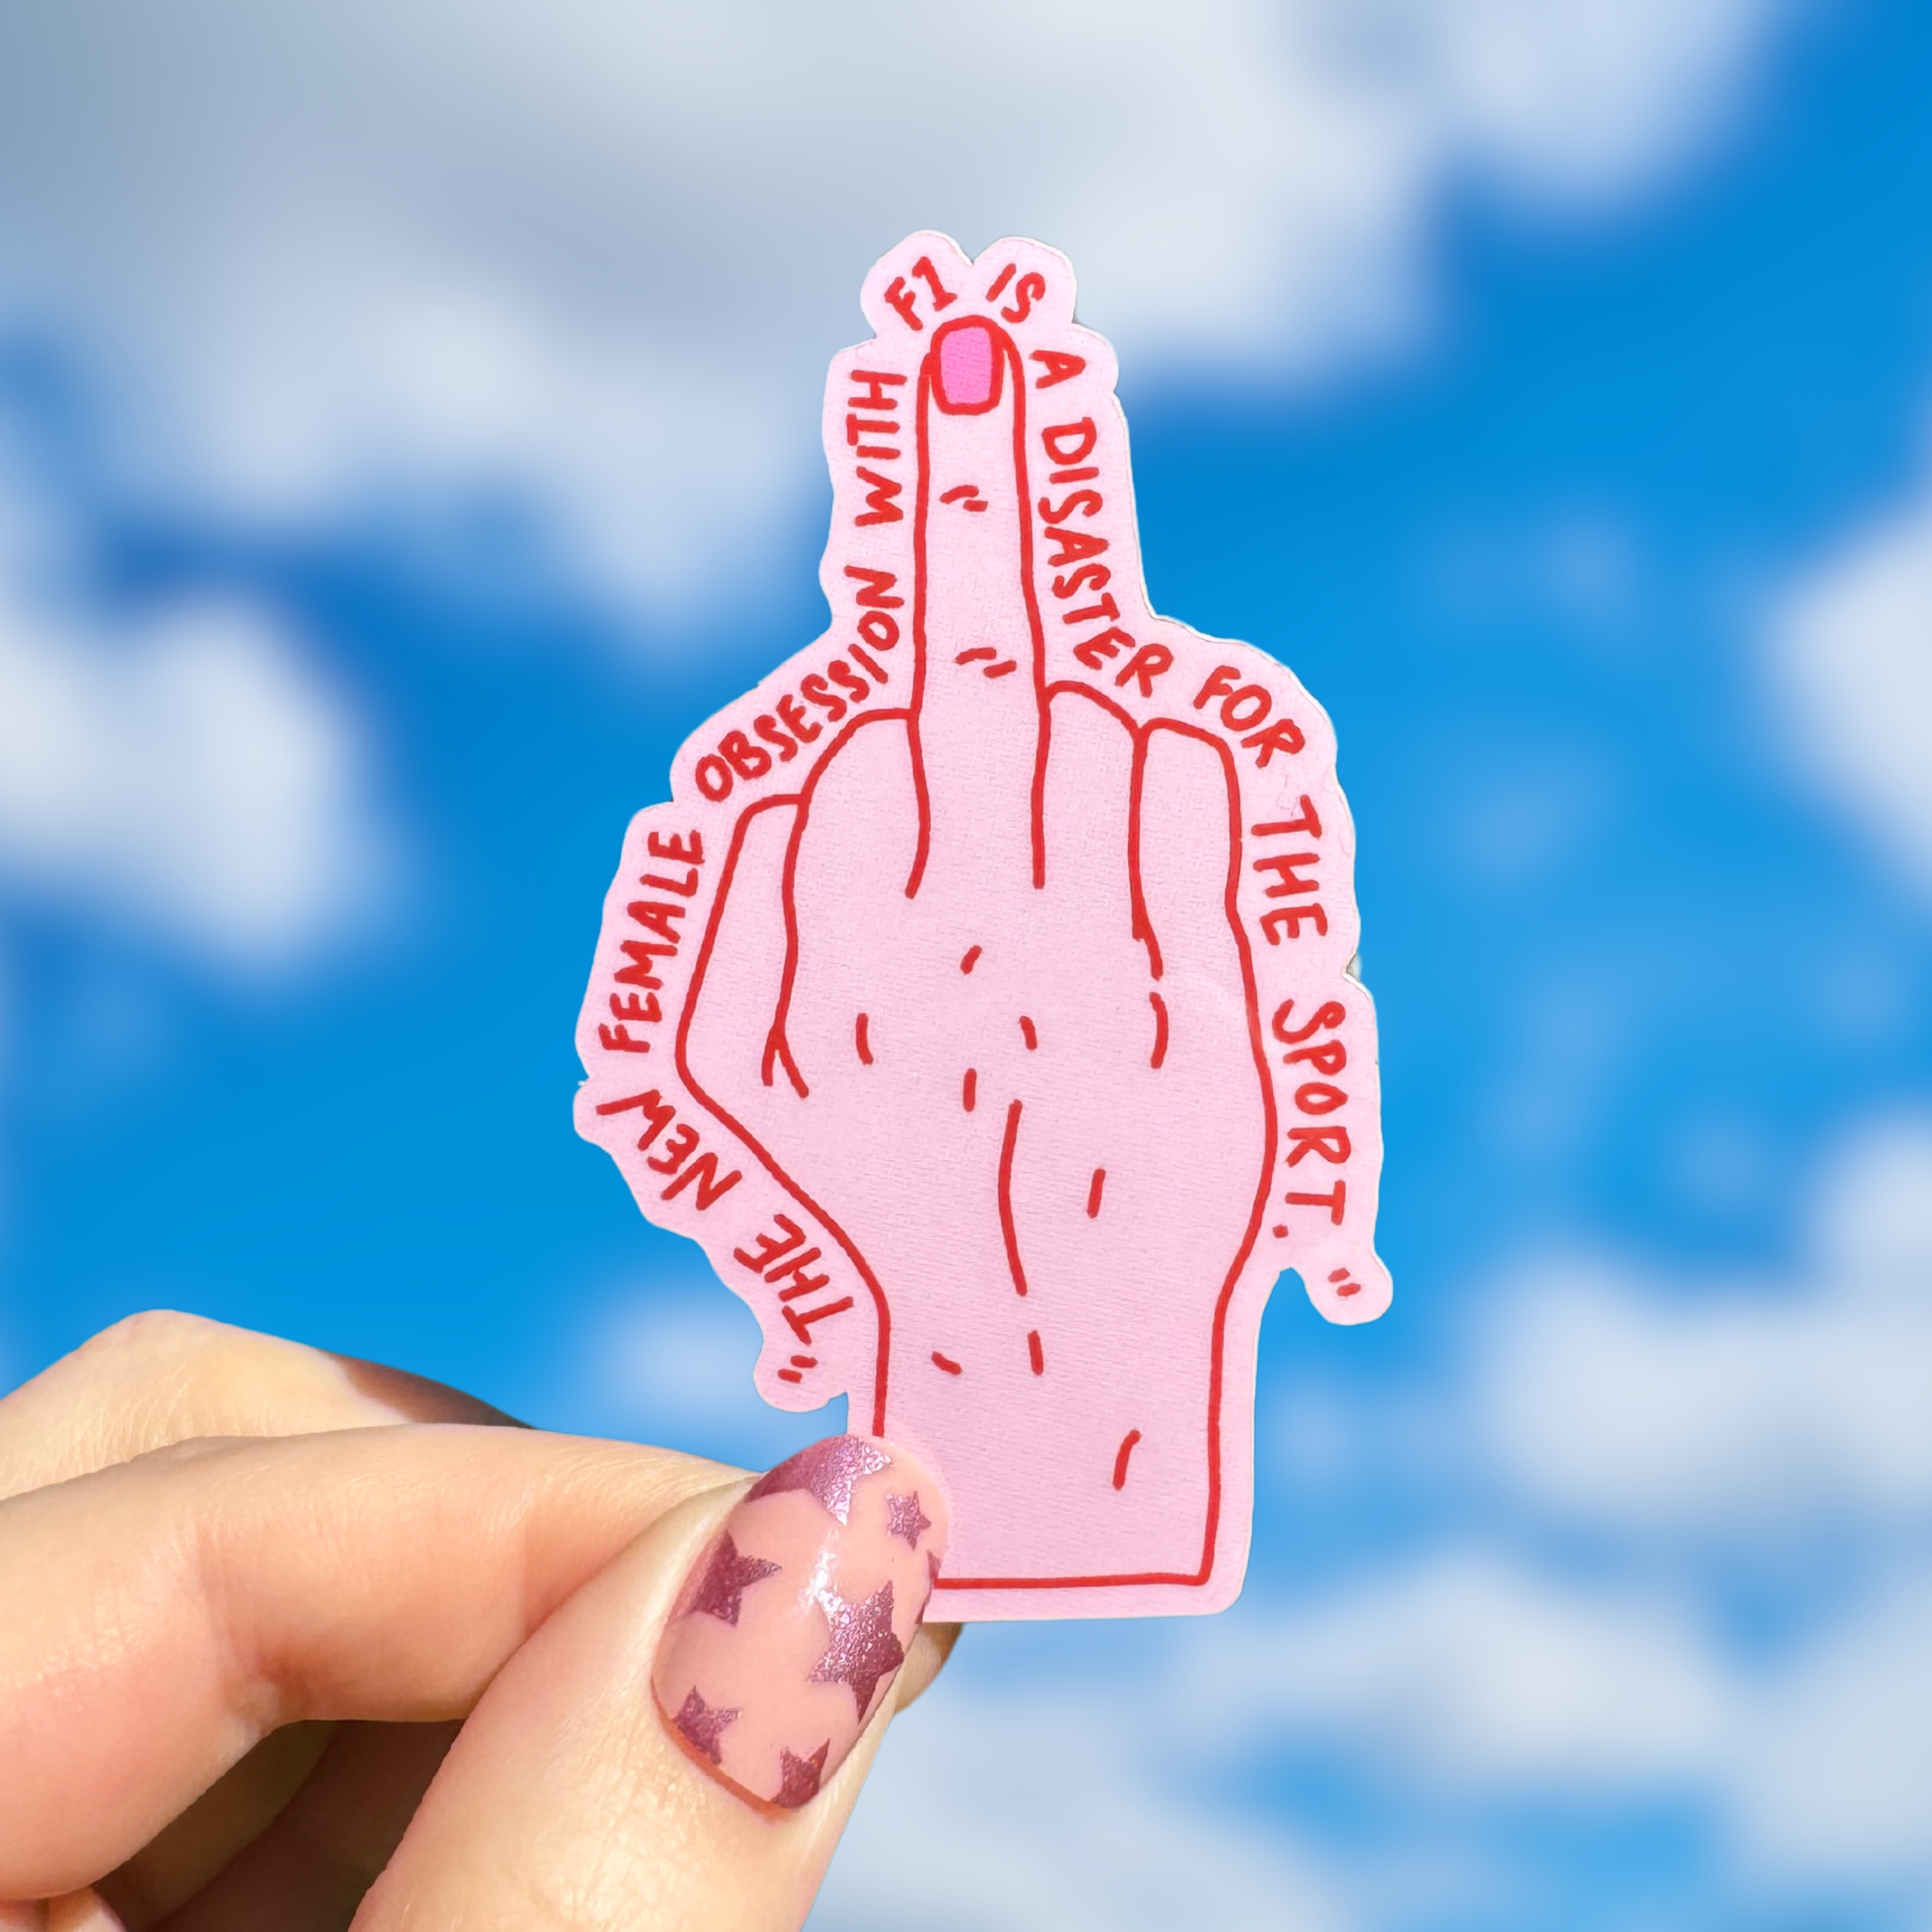 "Obsession" Middle Finger sticker